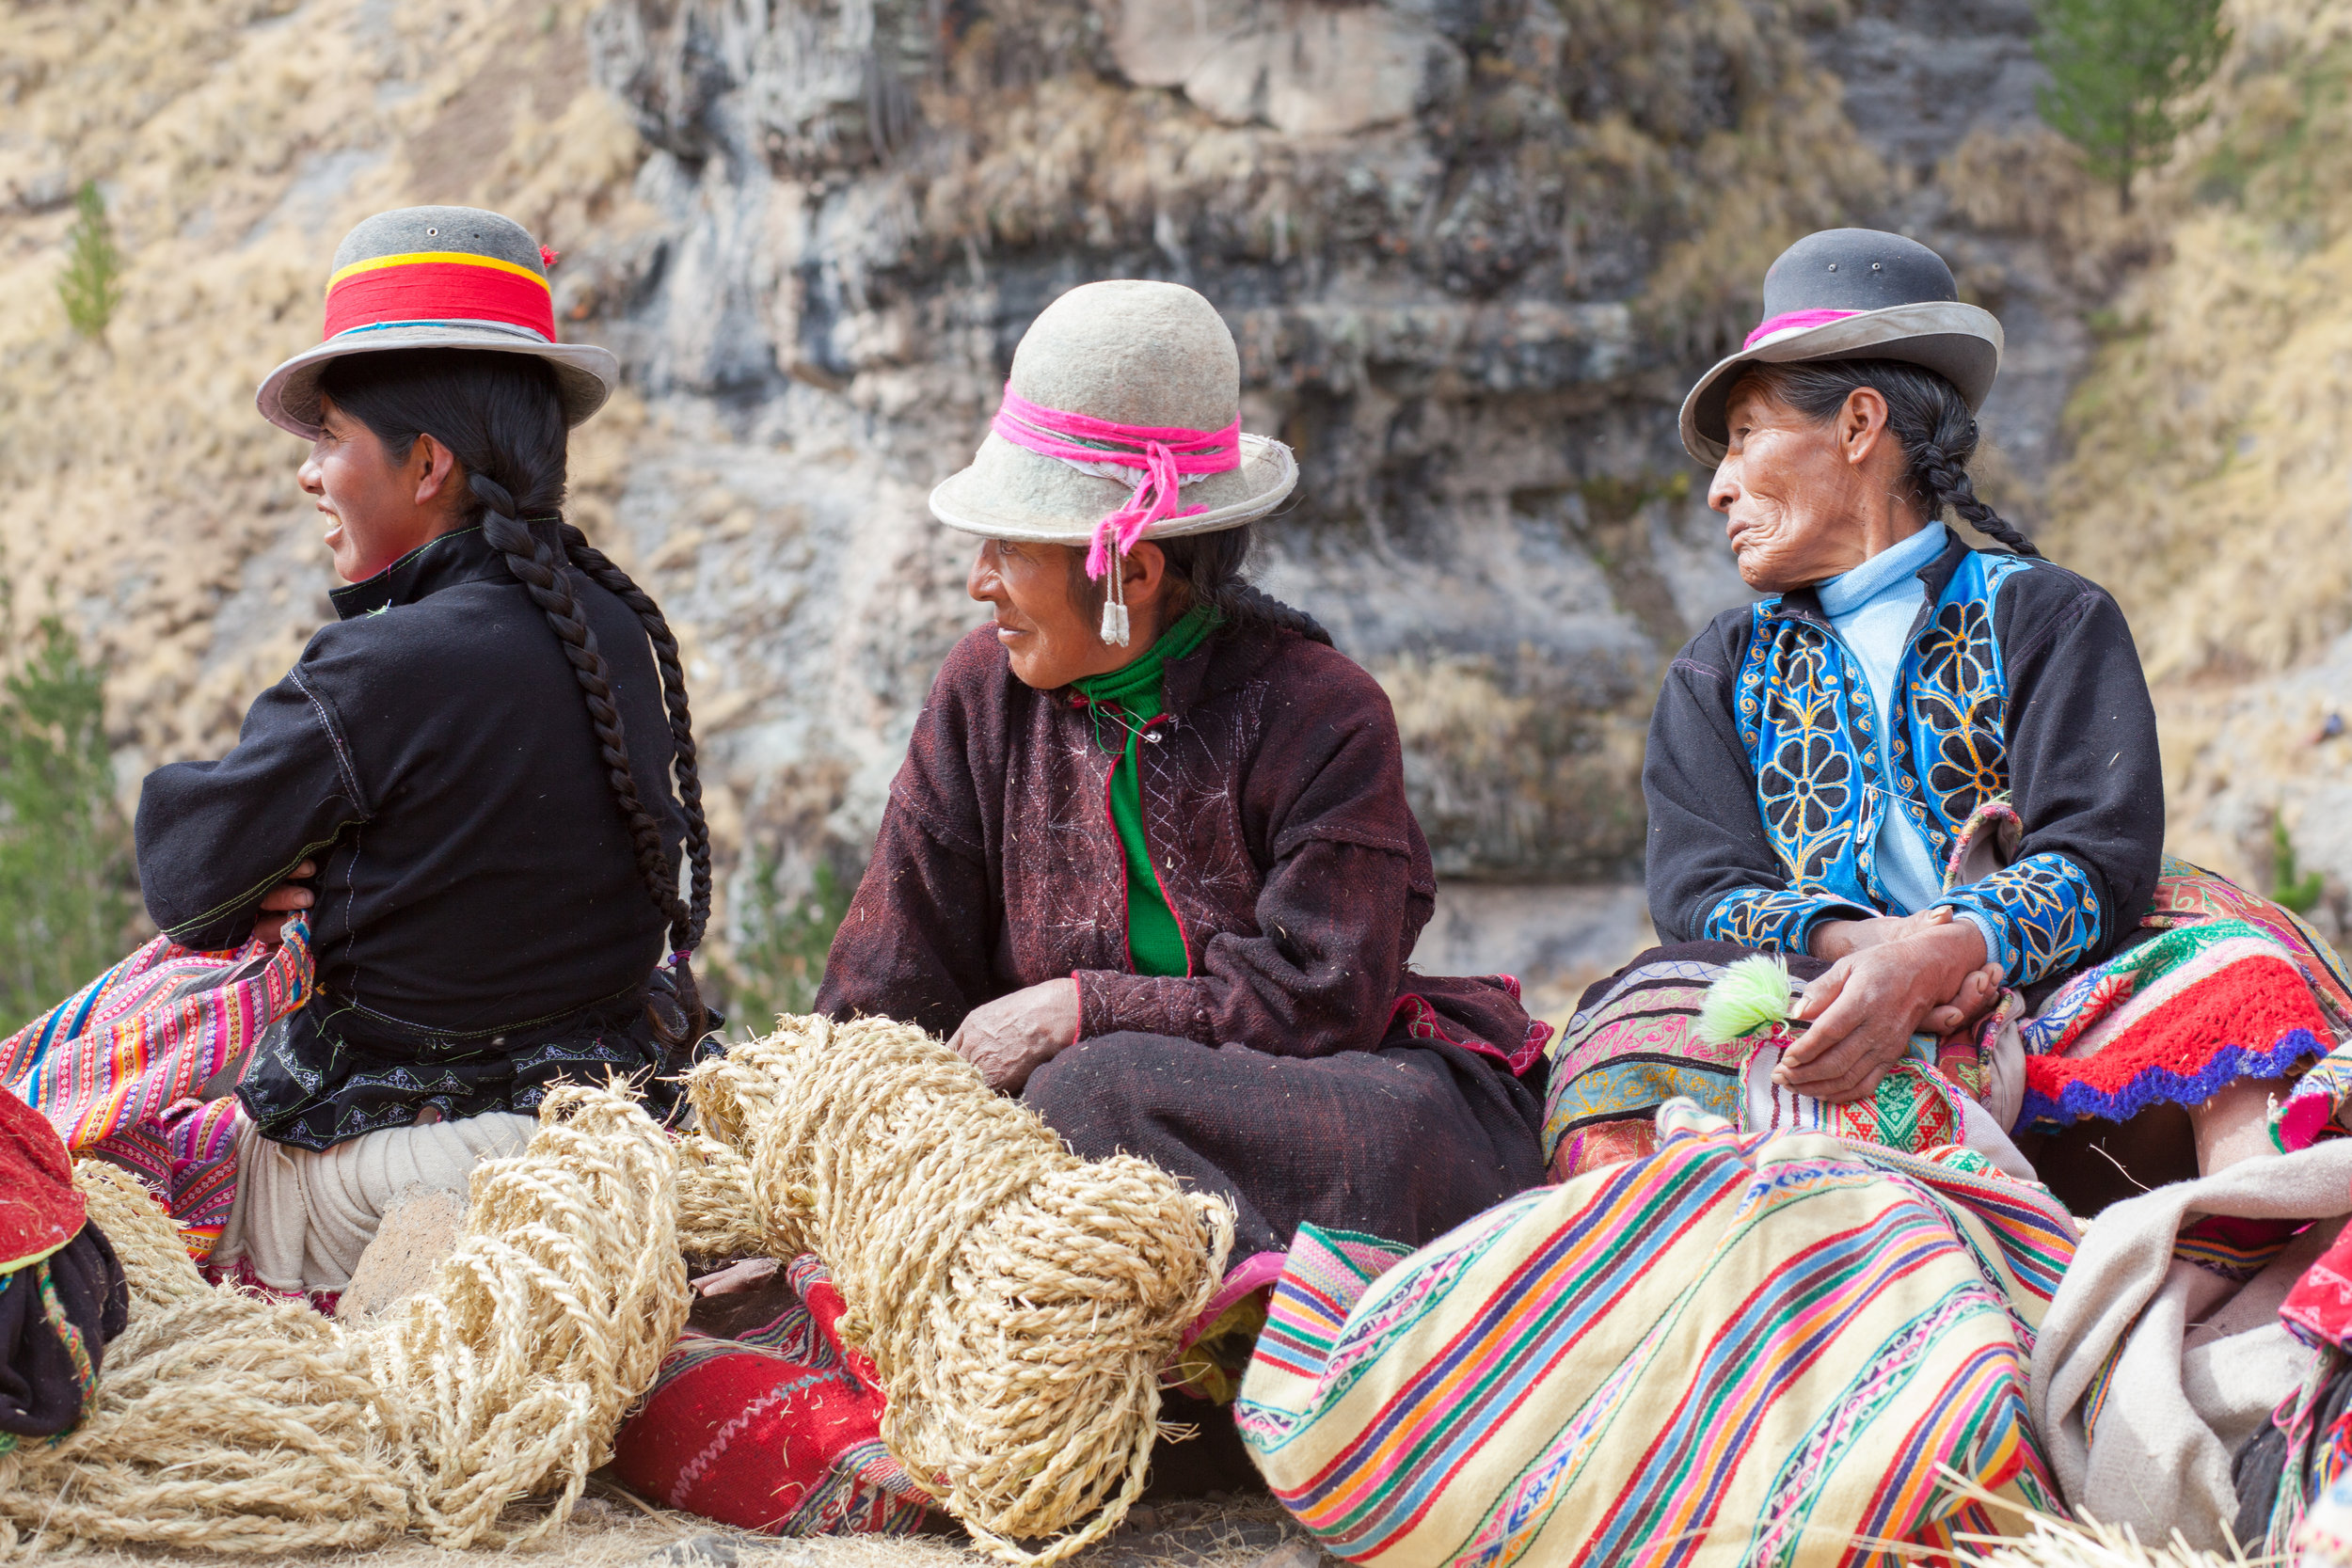 Peruvian travel photography by Geraint Rowland.